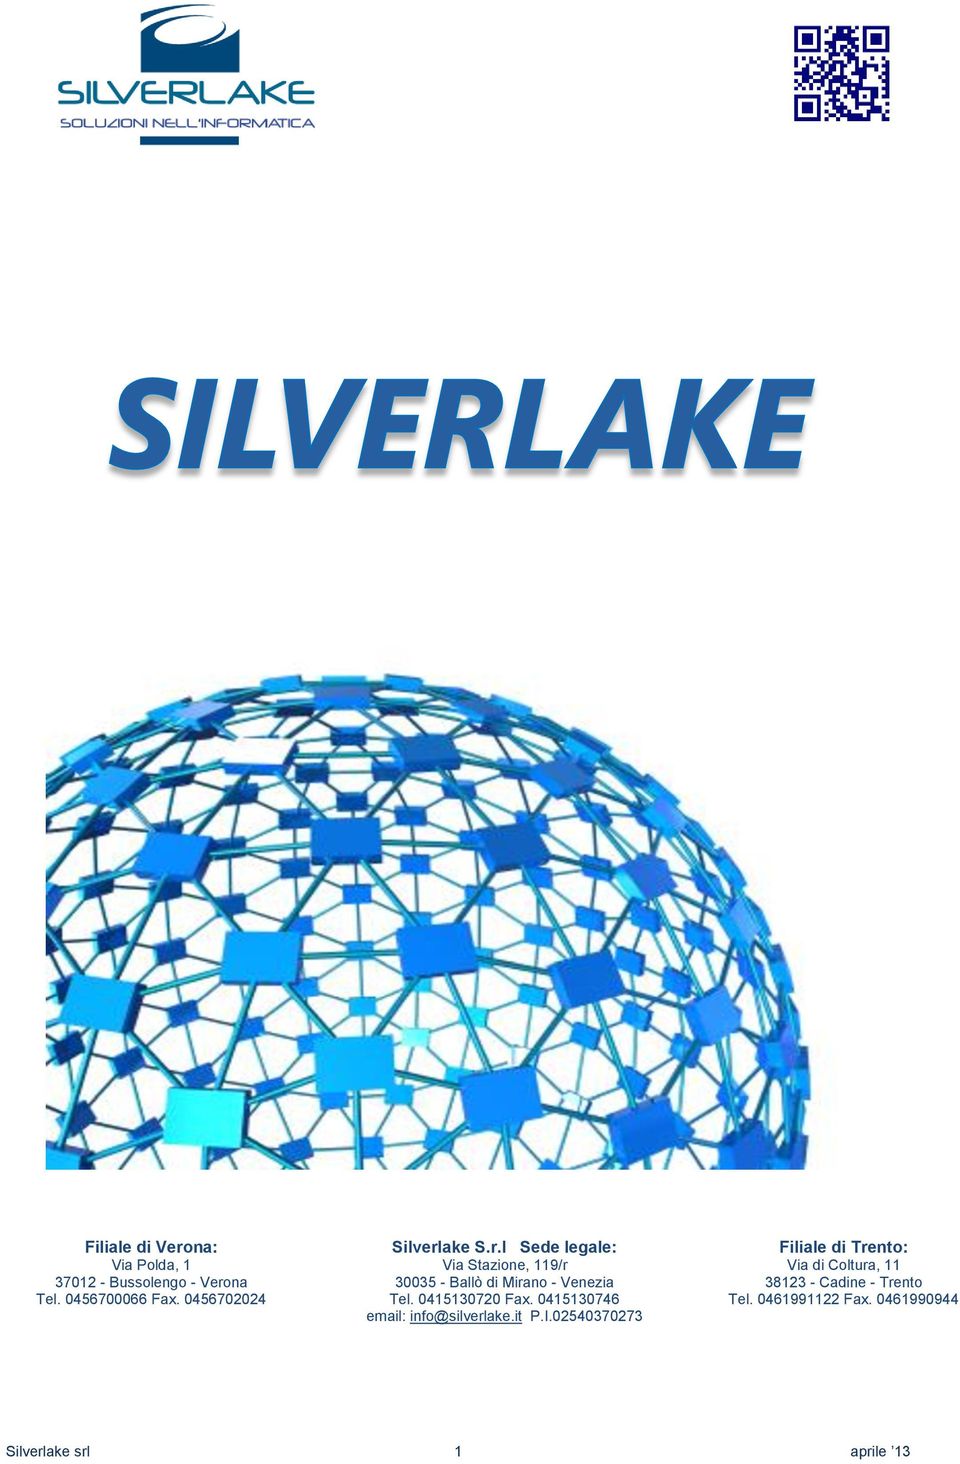 0415130720 Fax. 0415130746 email: info@silverlake.it P.I.